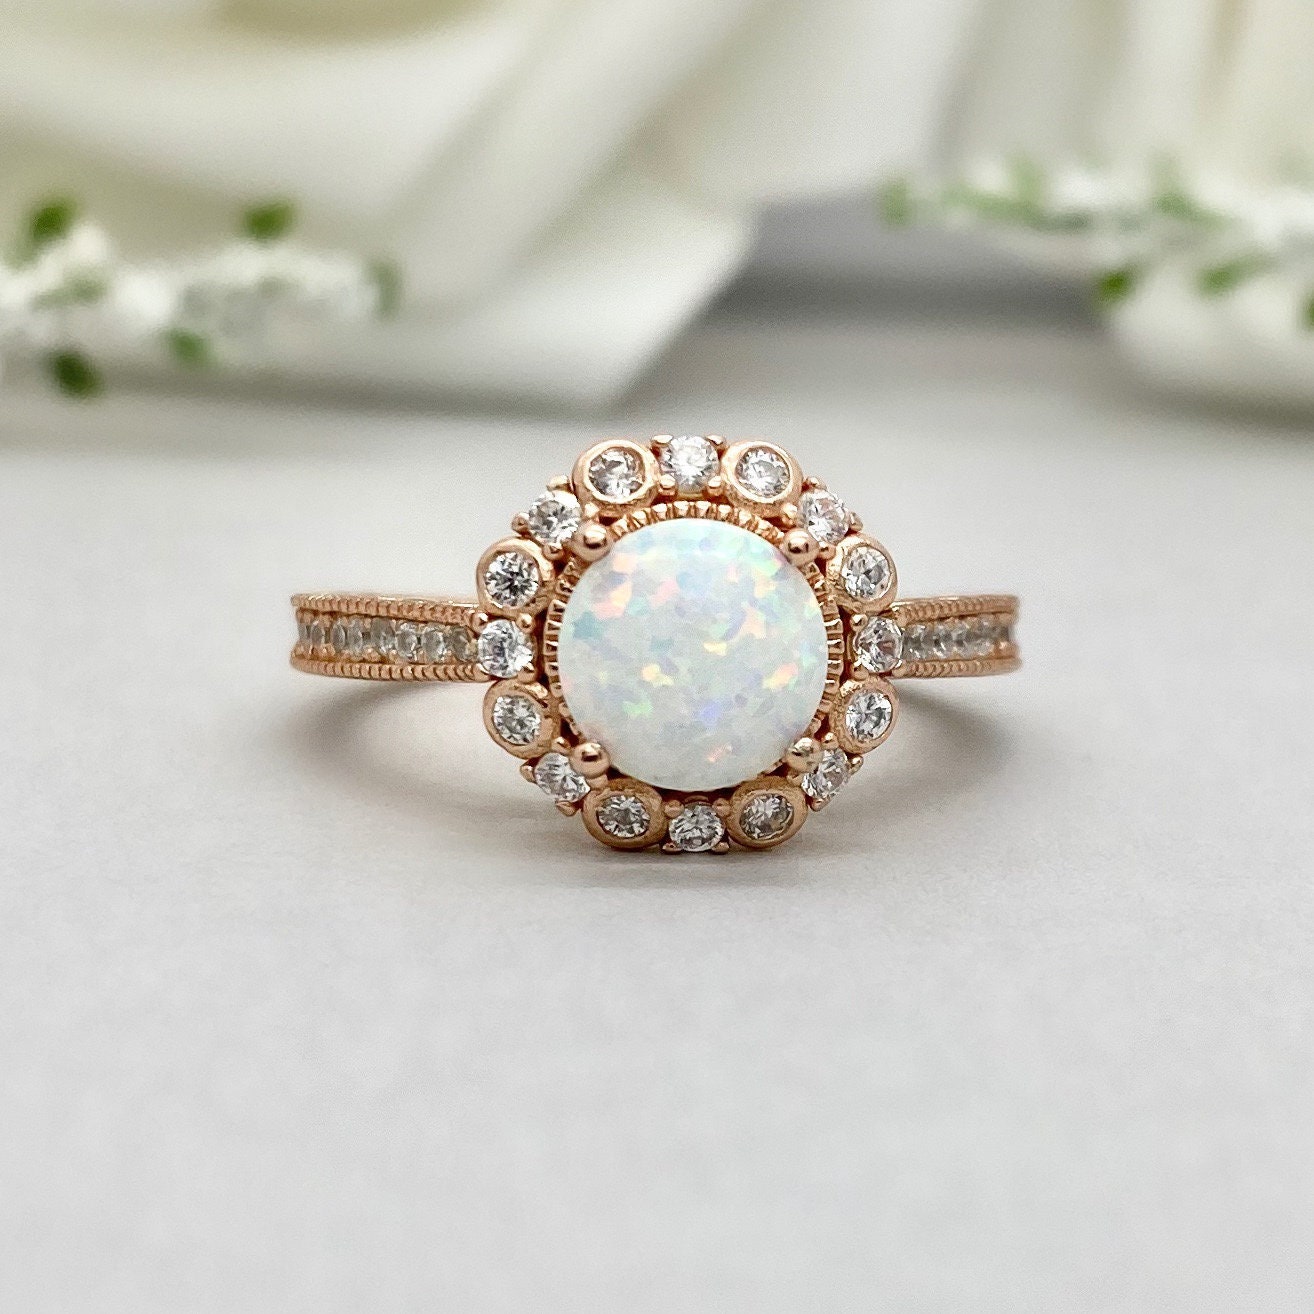 Rose Gold Round White Fire Opal Simulated Diamond Ring Art | Etsy